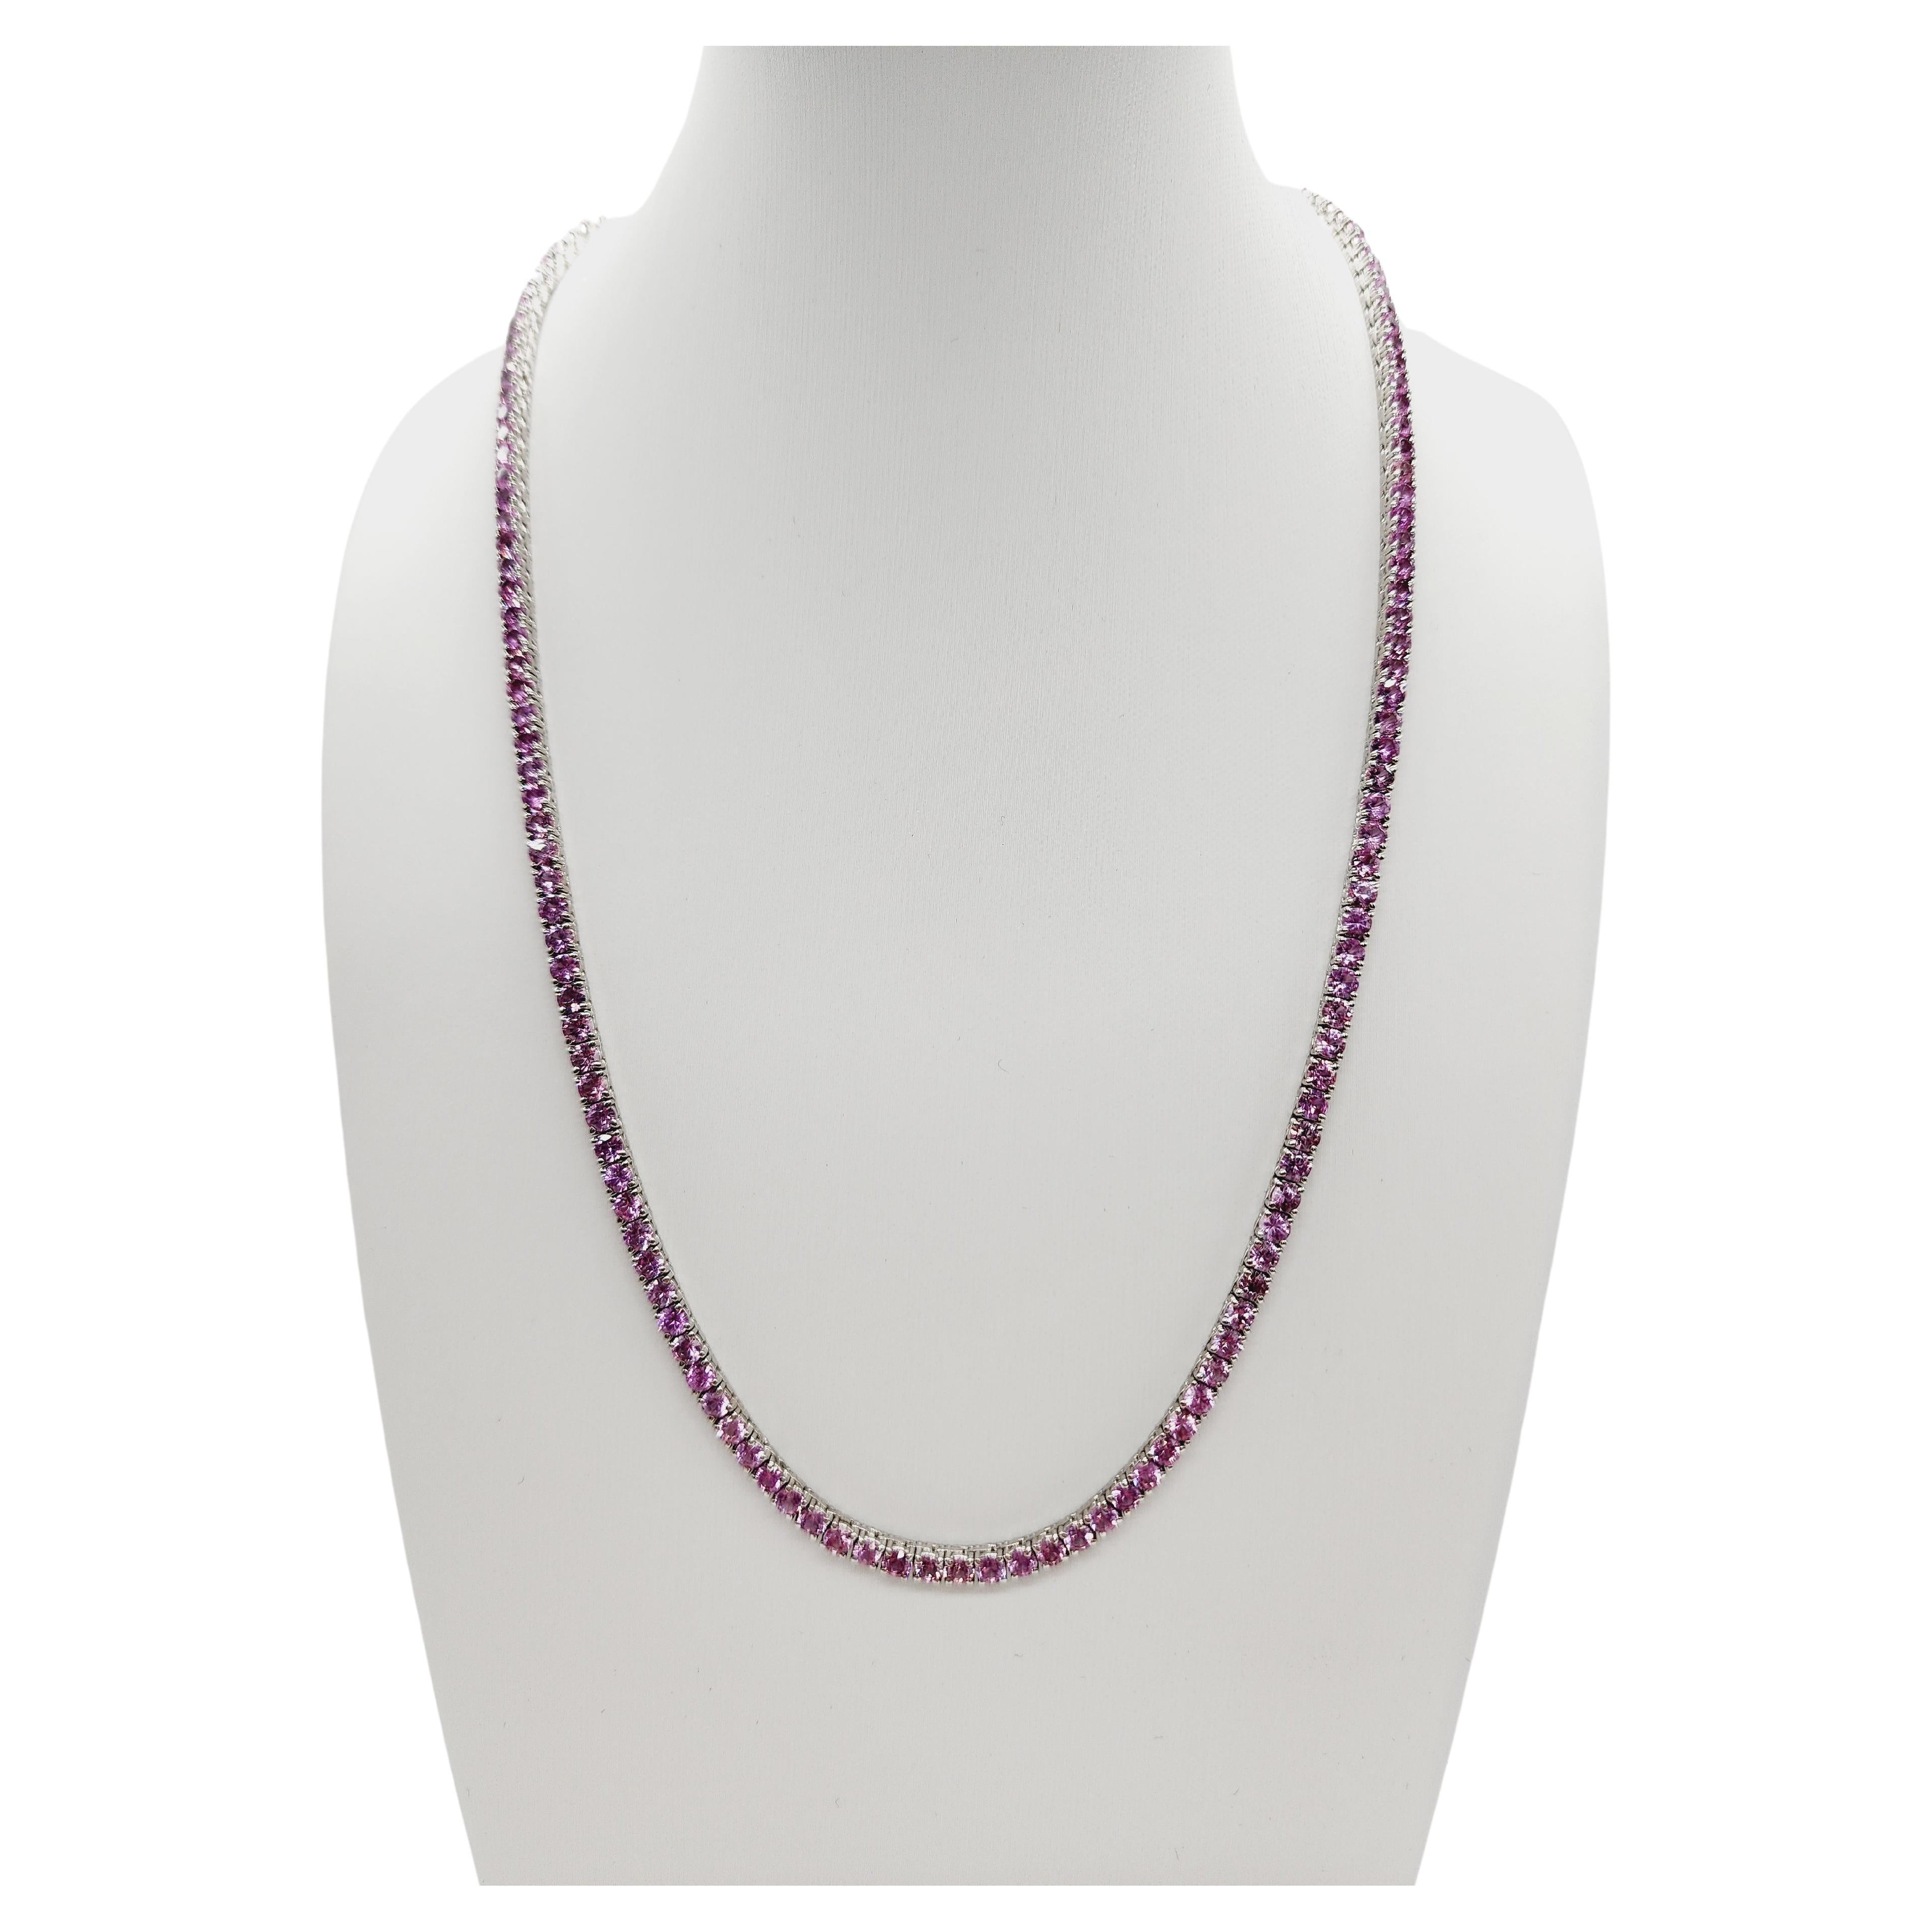 NATURAL PINK SAPPHIRE TENNIS NECKLACE WHITE GOLD 14K
18 INCH. 3.2MM WIDE.

All sapphire are natural, not treated.